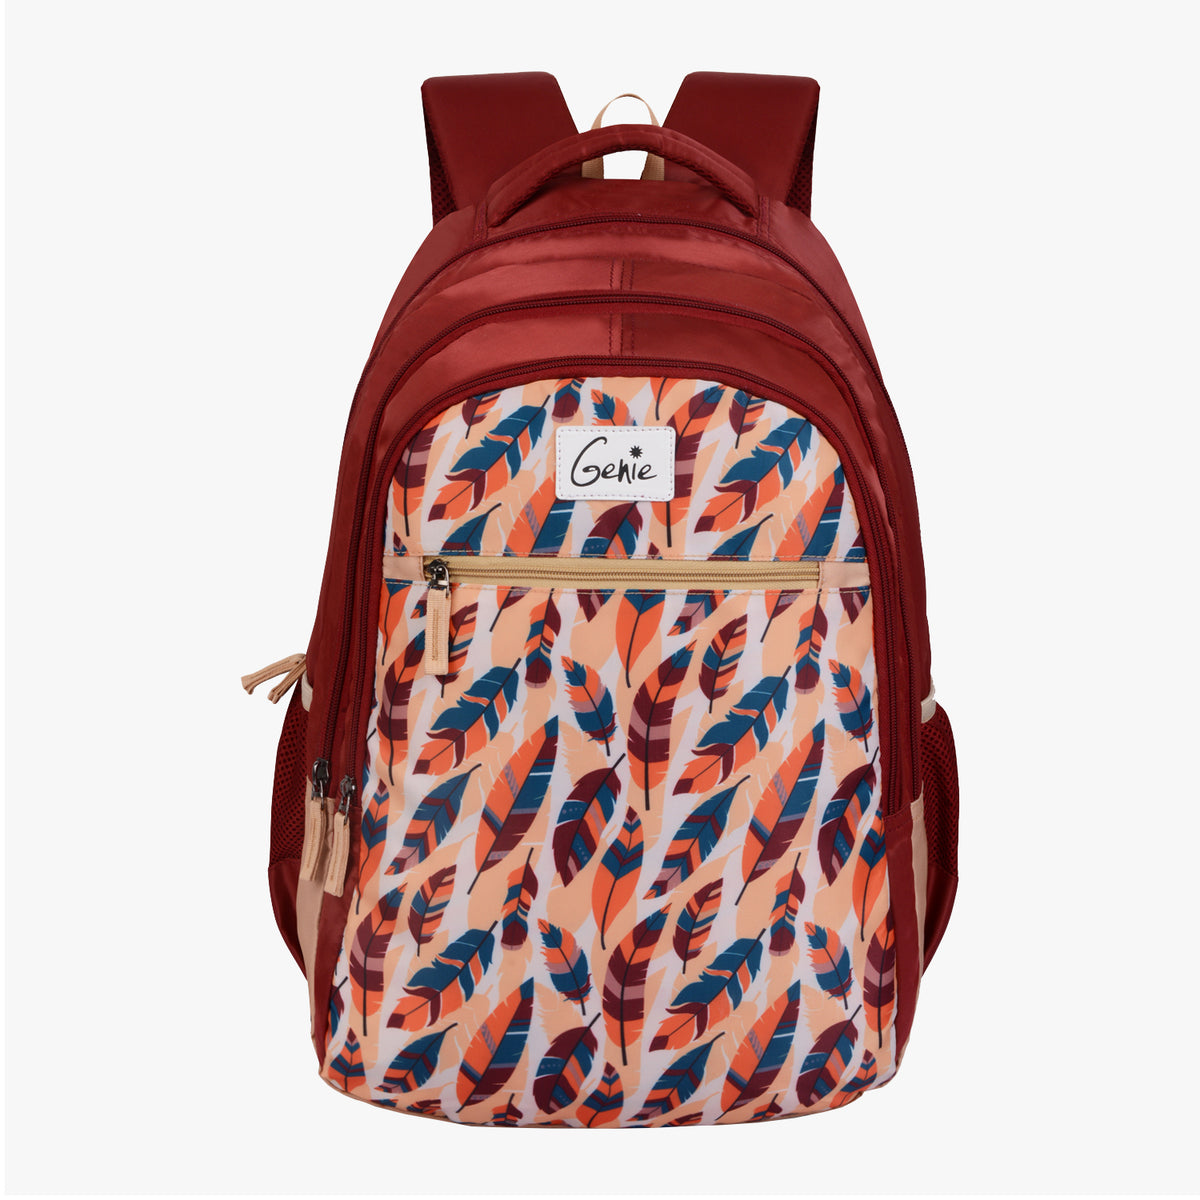 Genie Blush 36L Maroon School Backpack With Easy Access Pockets